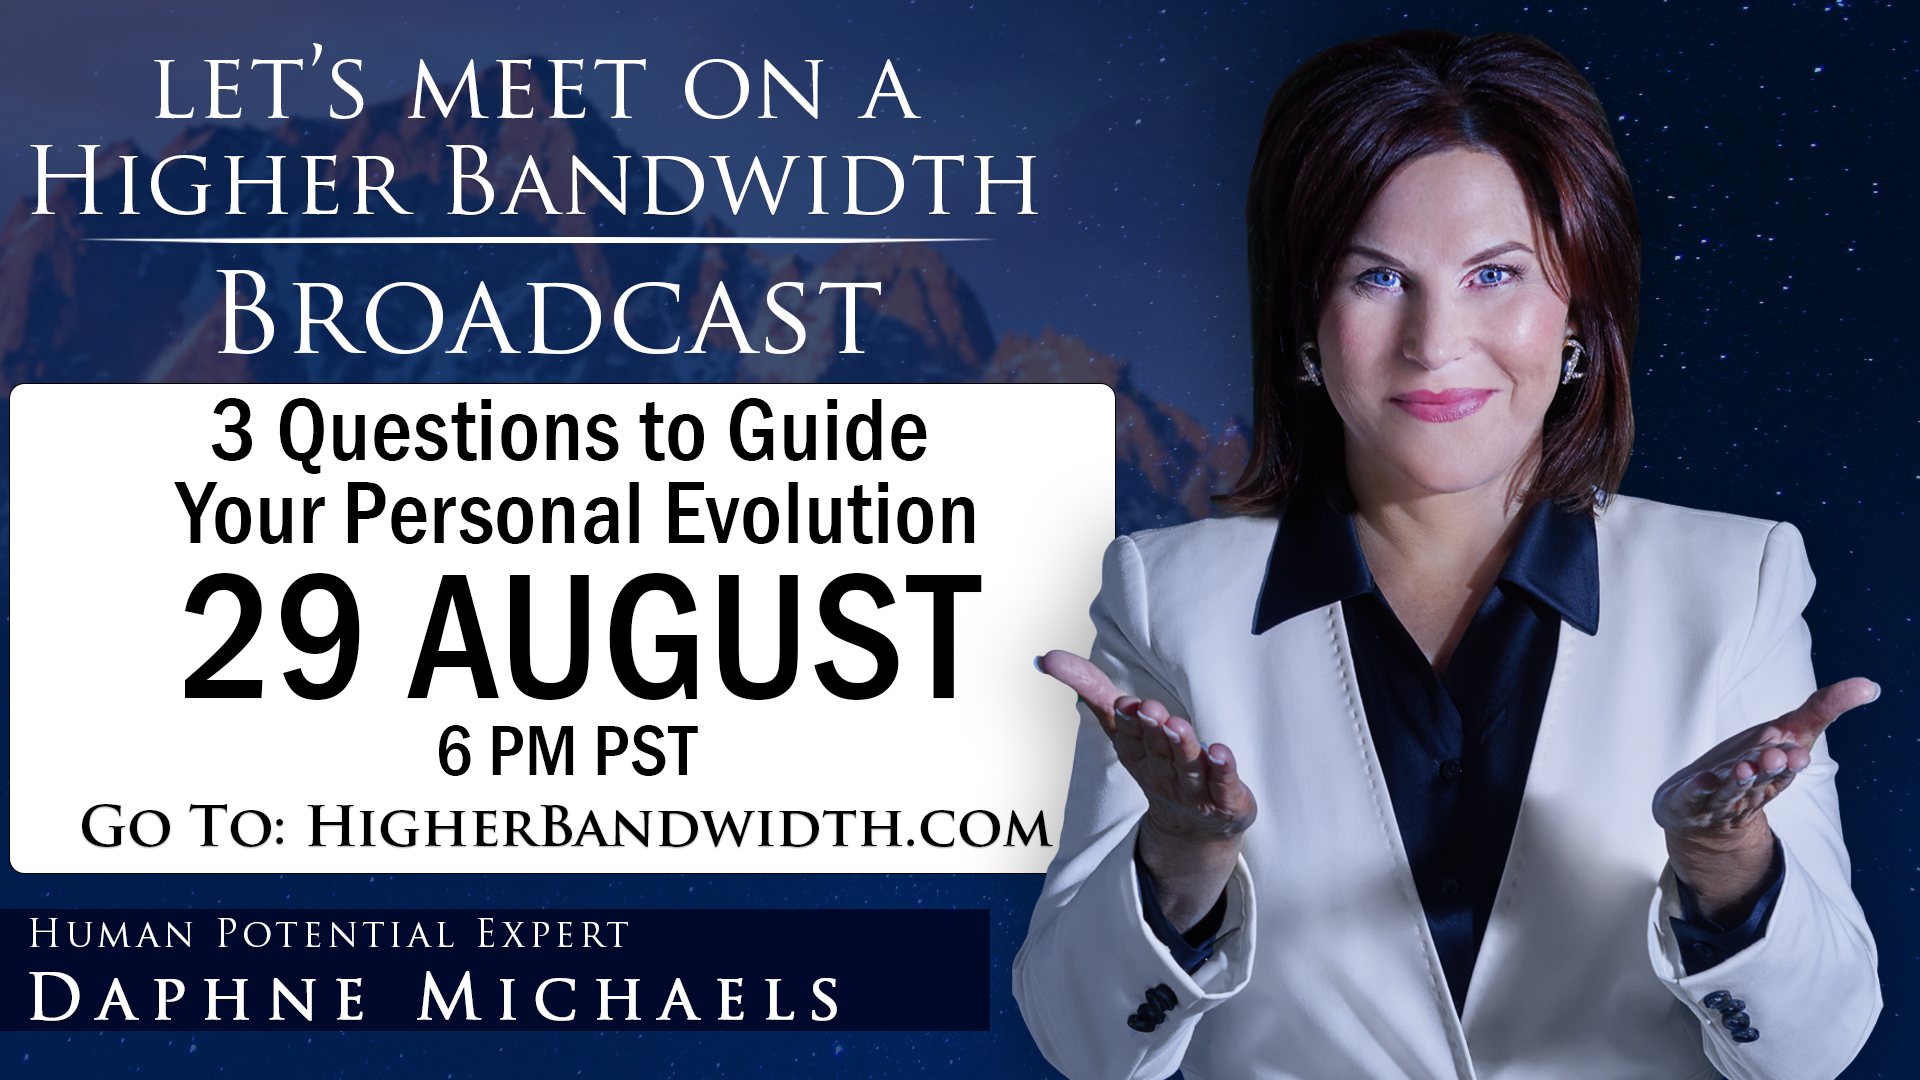 3 Questions to Guide Your Personal Evolution